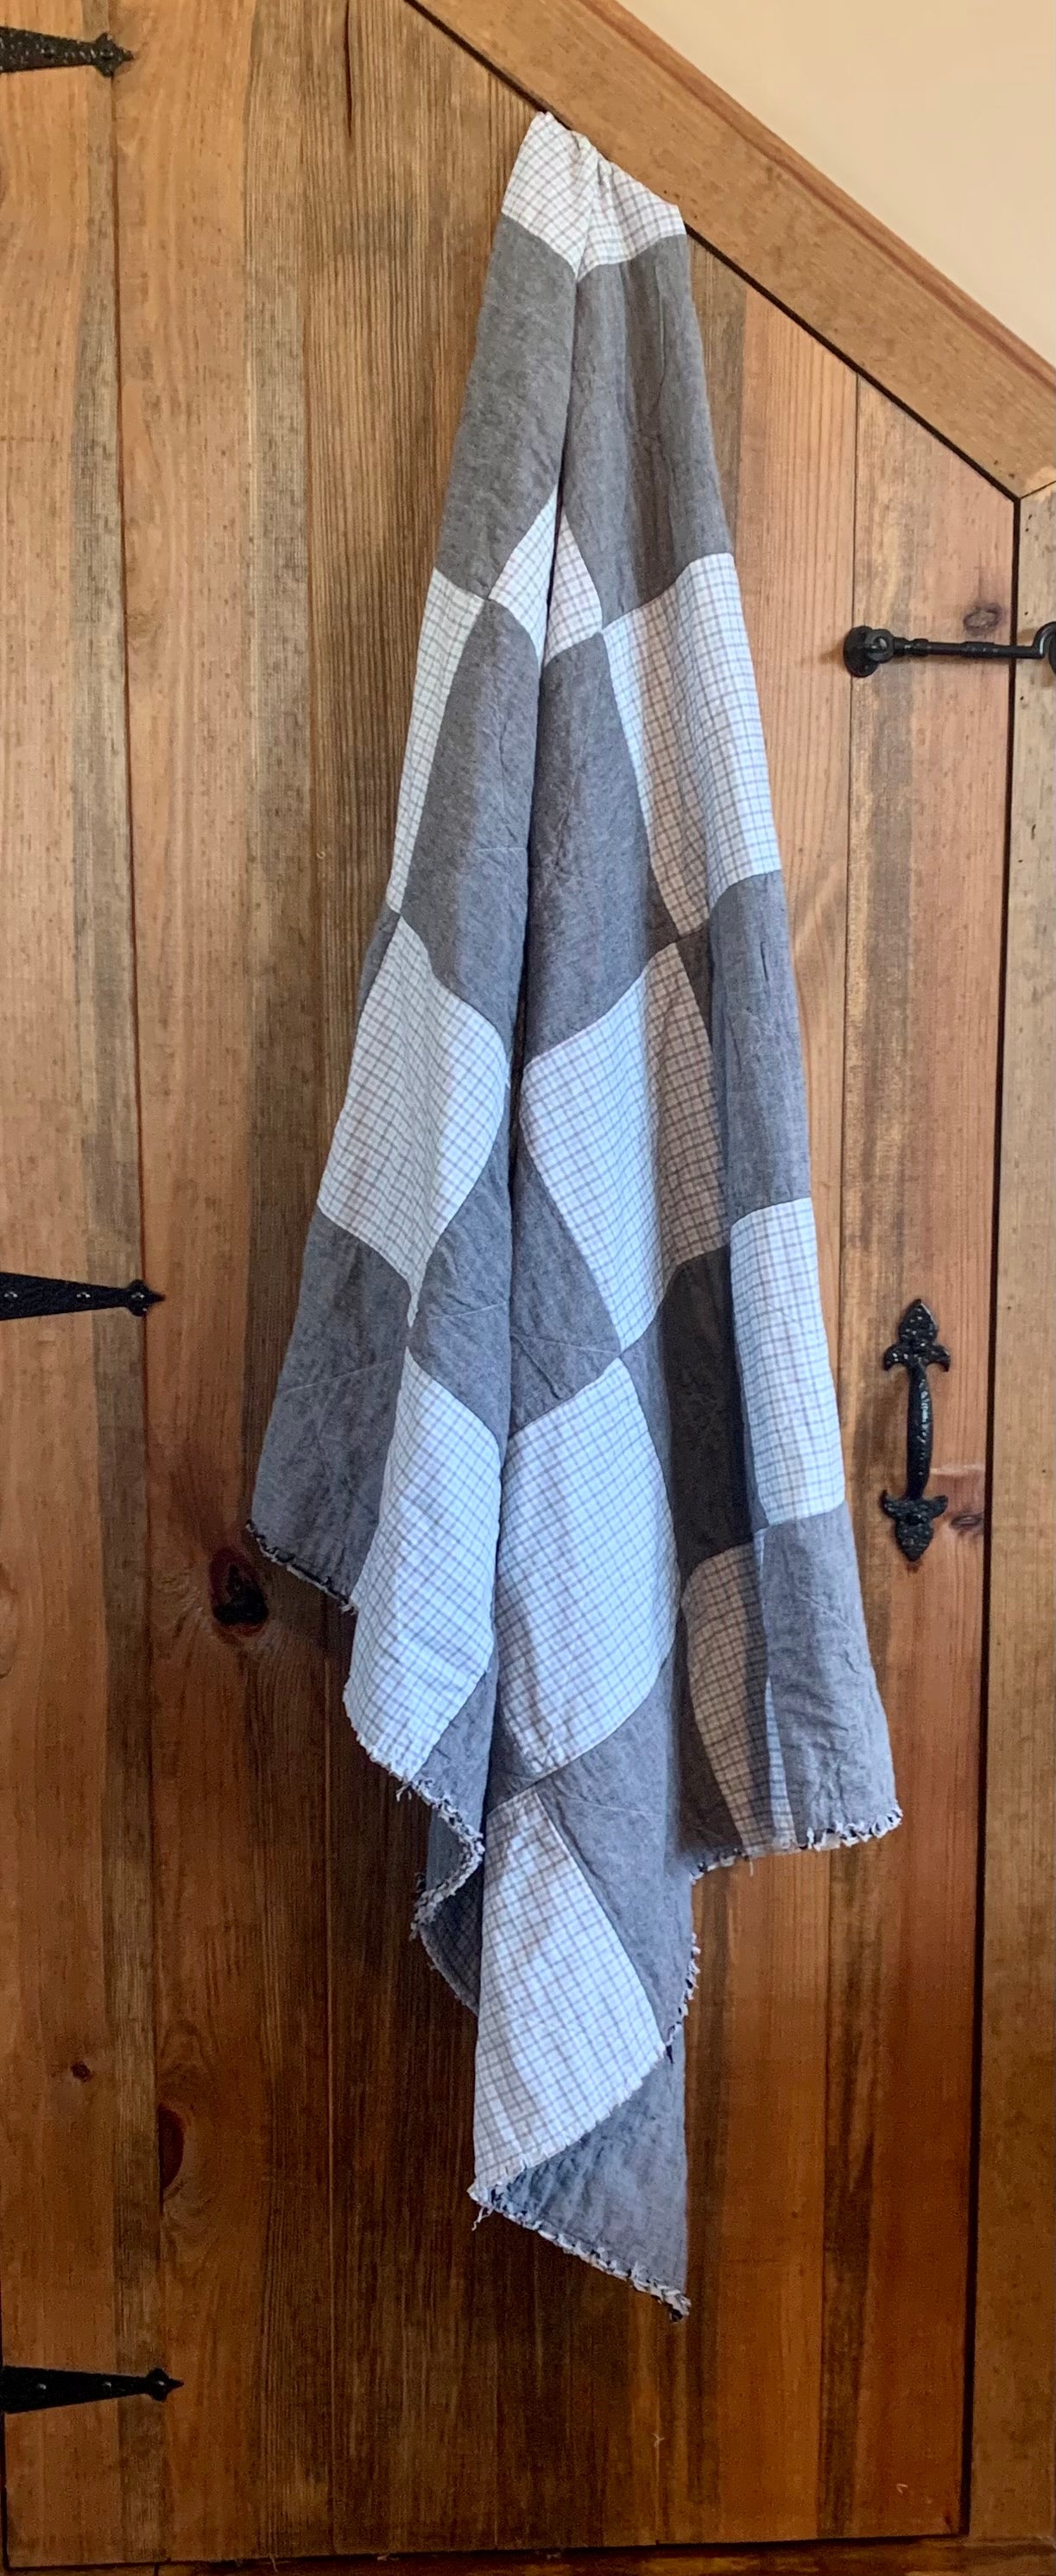 Plaid and  grey Quilt 55”x 45"